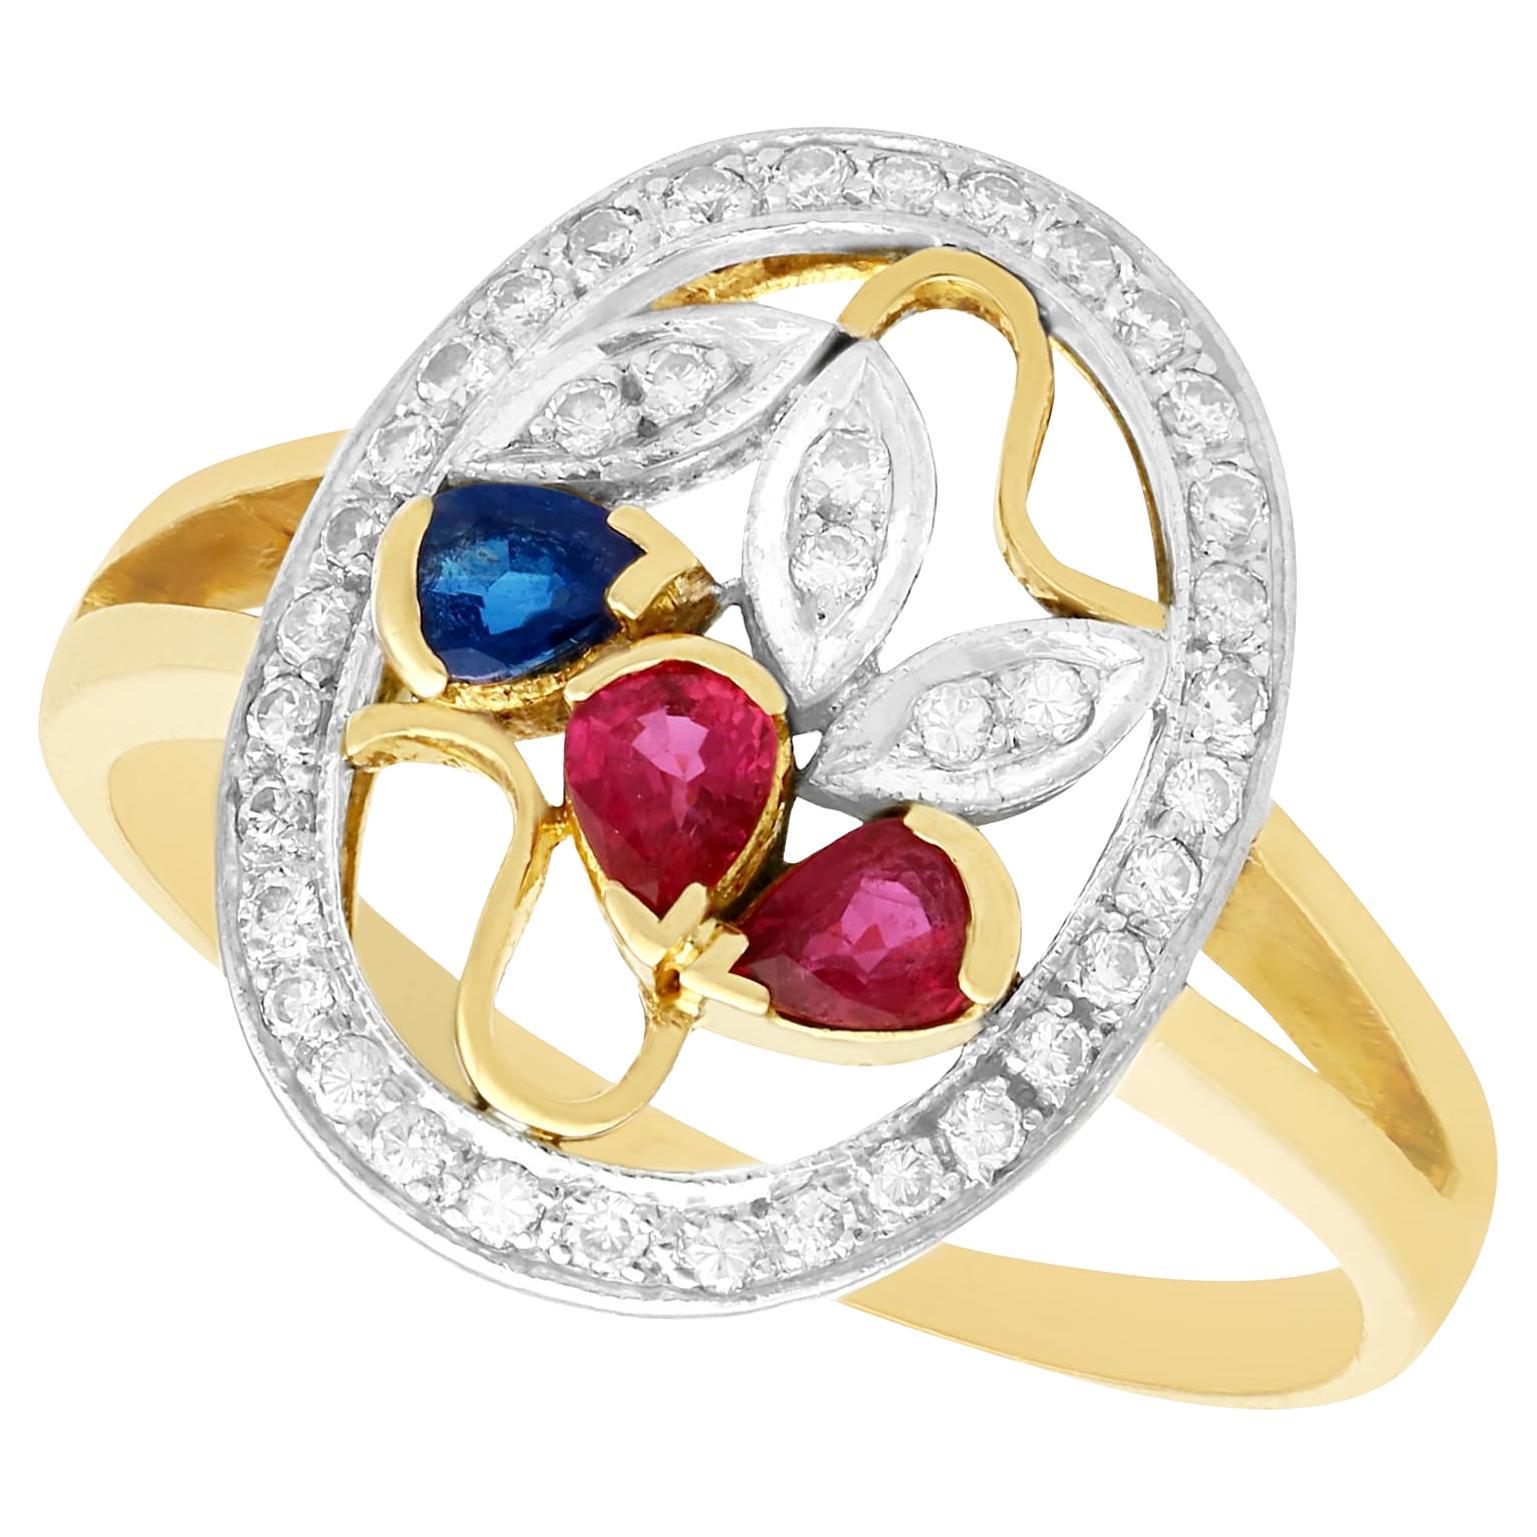 Vintage 1940s Ruby Sapphire Diamond Yellow Gold Cocktail Ring